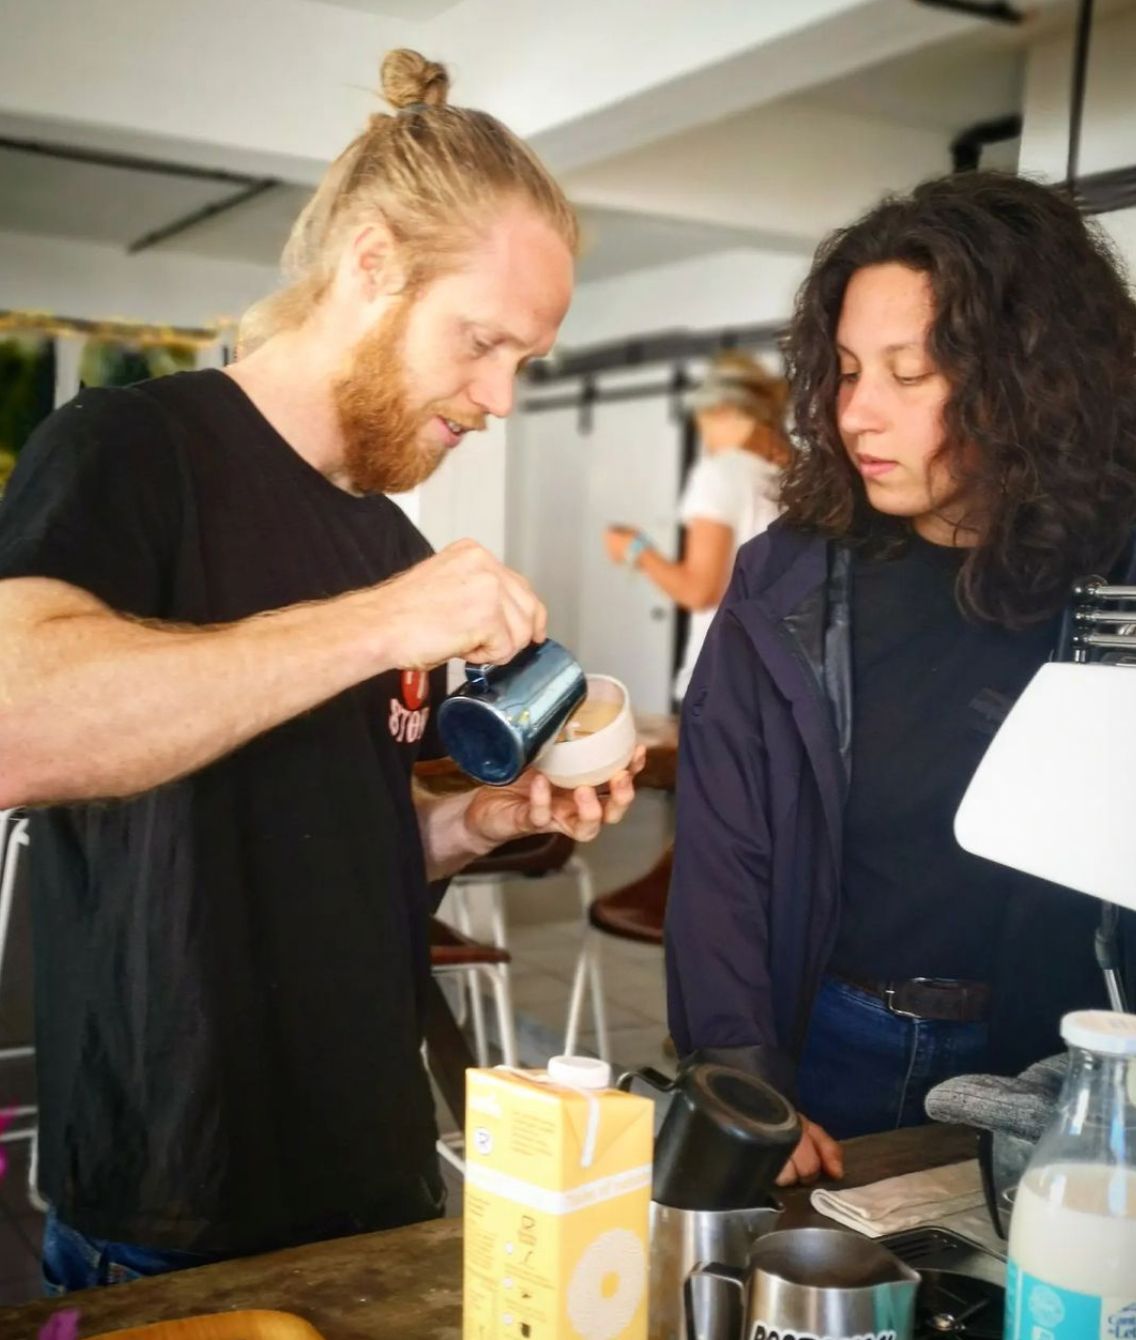 Coffee Workshop "Latte Art" with Shan and Nick in Praia do Burgau, Algarve, Portugal by subcultours